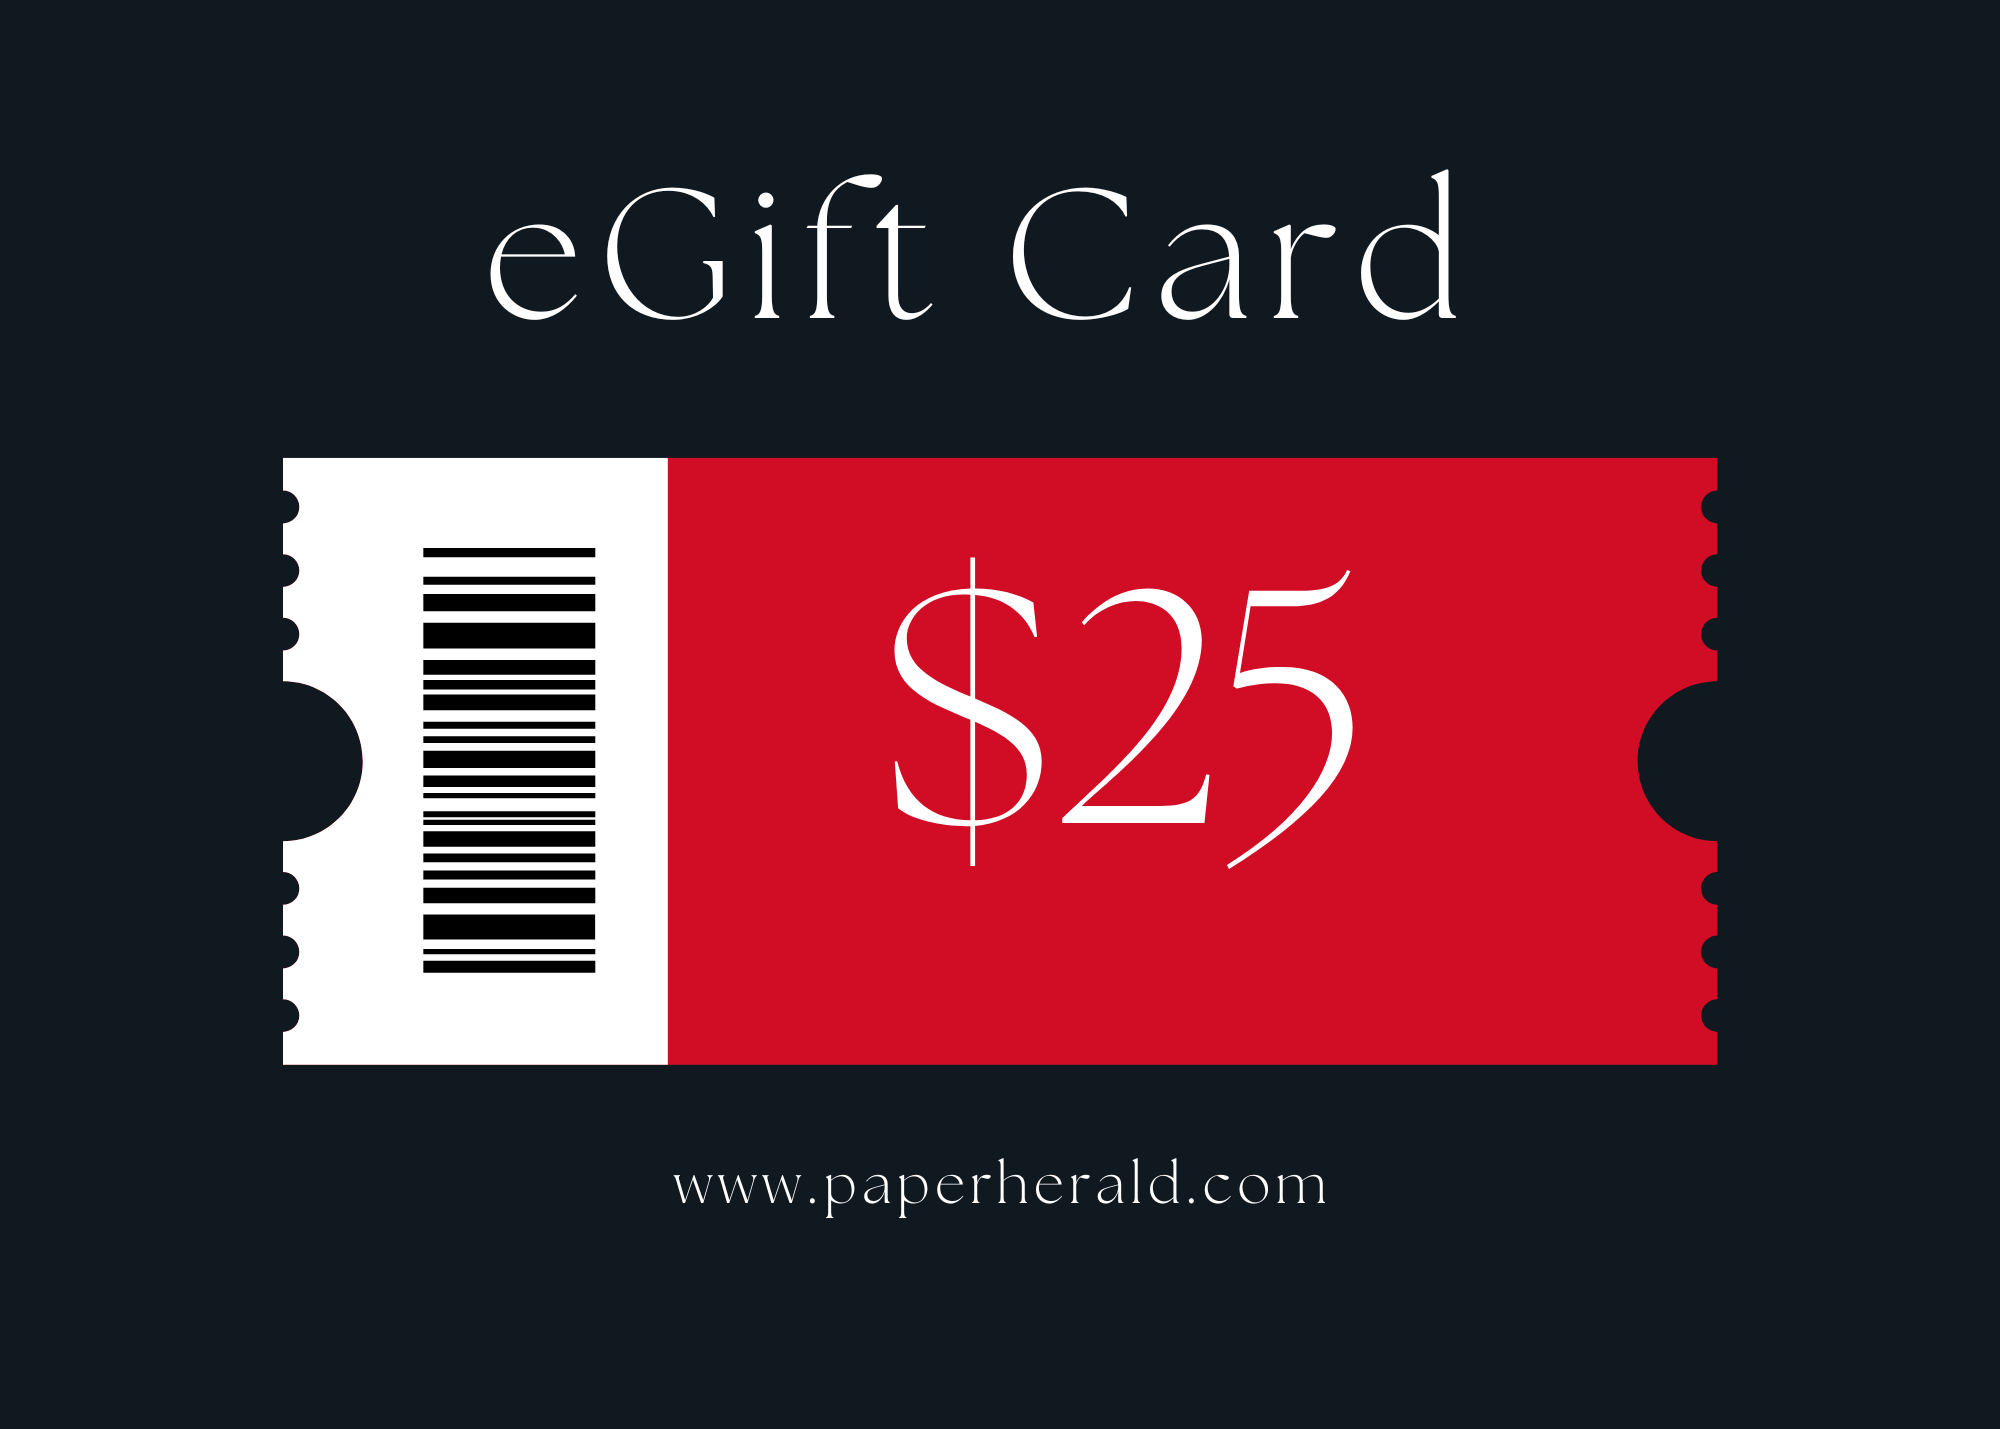 Paper Herald Gift Card